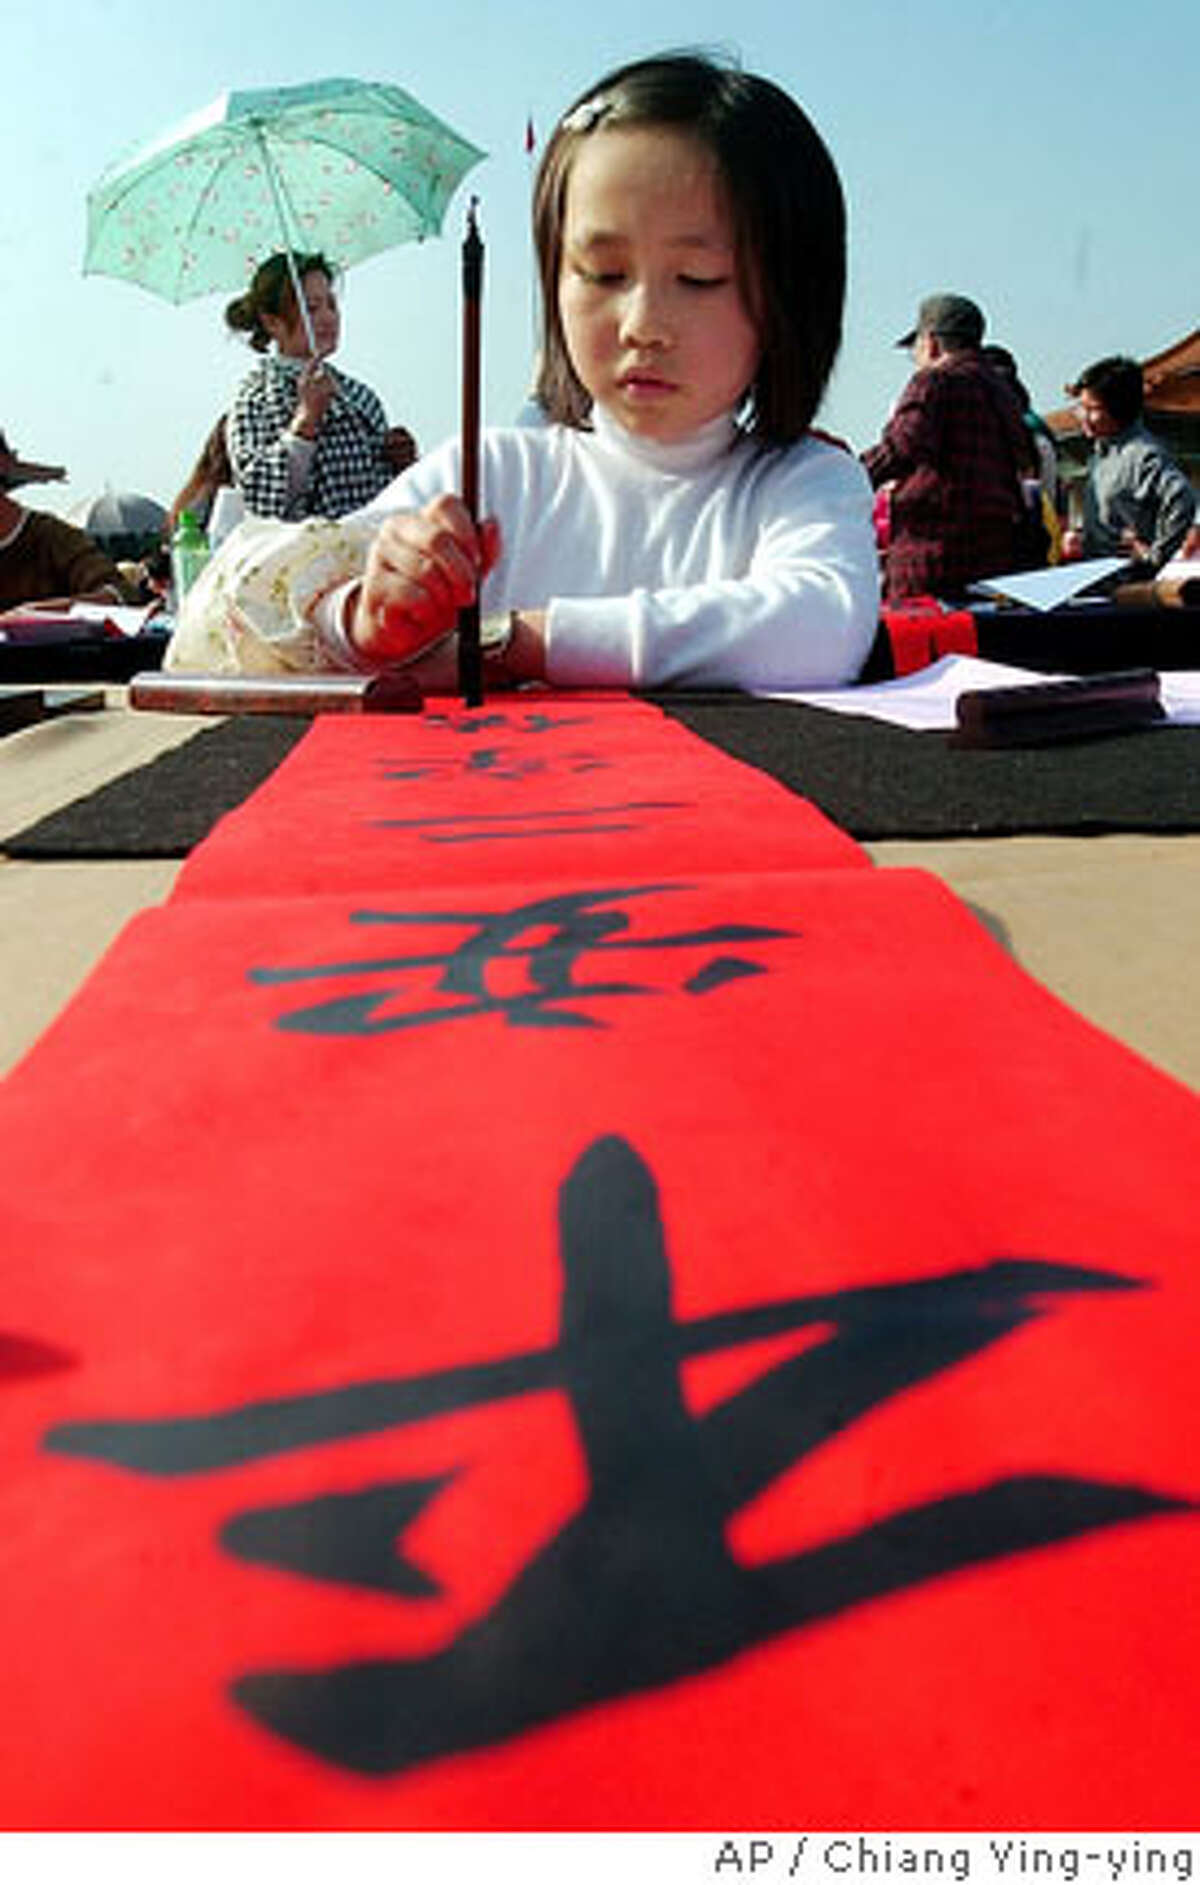 TRAVEL TAIWAN -- Taiwanese girl writes lucky words with hair brush during the activities for the upcoming Chinese New Year, Sunday, Feb. 4, 2007, in Taipei, Taiwan. Chinese New Year celebrations, according to the lunar calendar, falls on Feb. 18, and will commemorate the year of the pig. The characters partially read "Peace.," (AP Photo/Chiang Ying-ying)